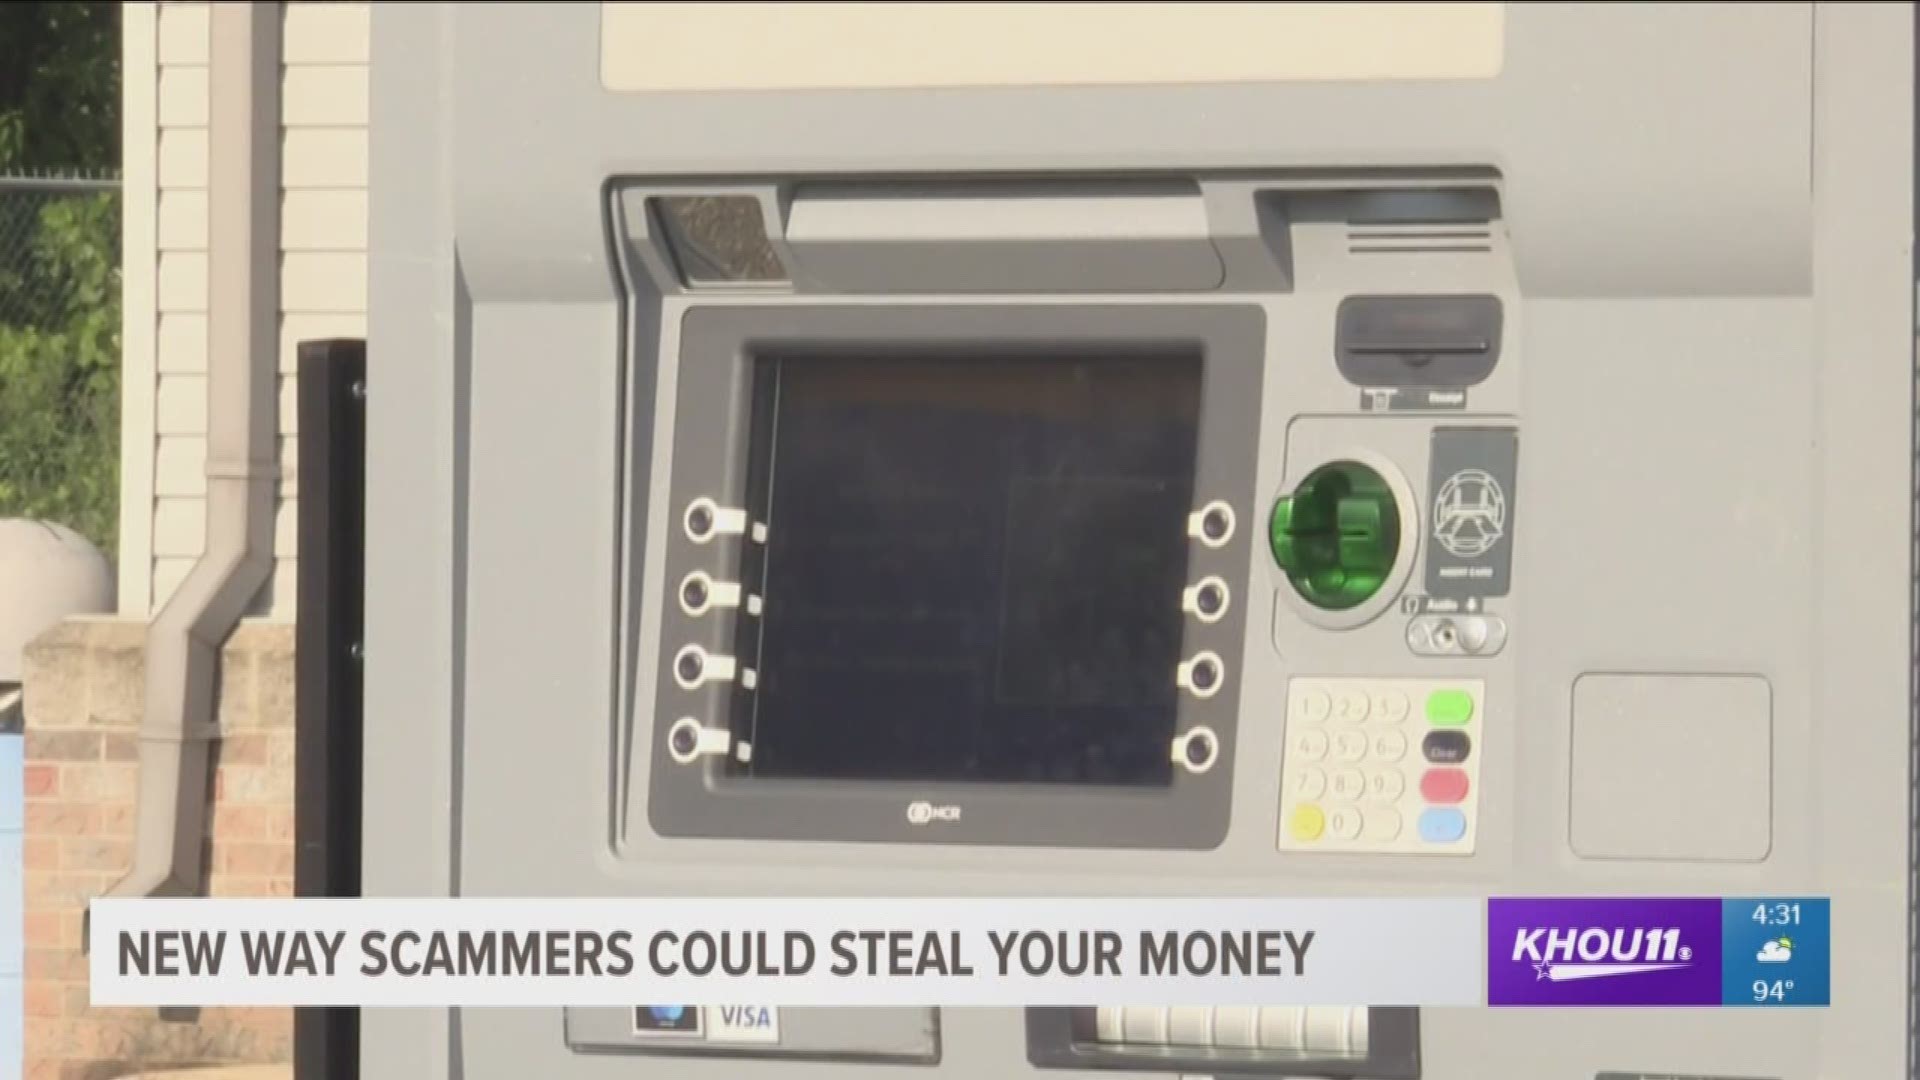 The FBI is warning banks of a new scheme targeting ATMs.